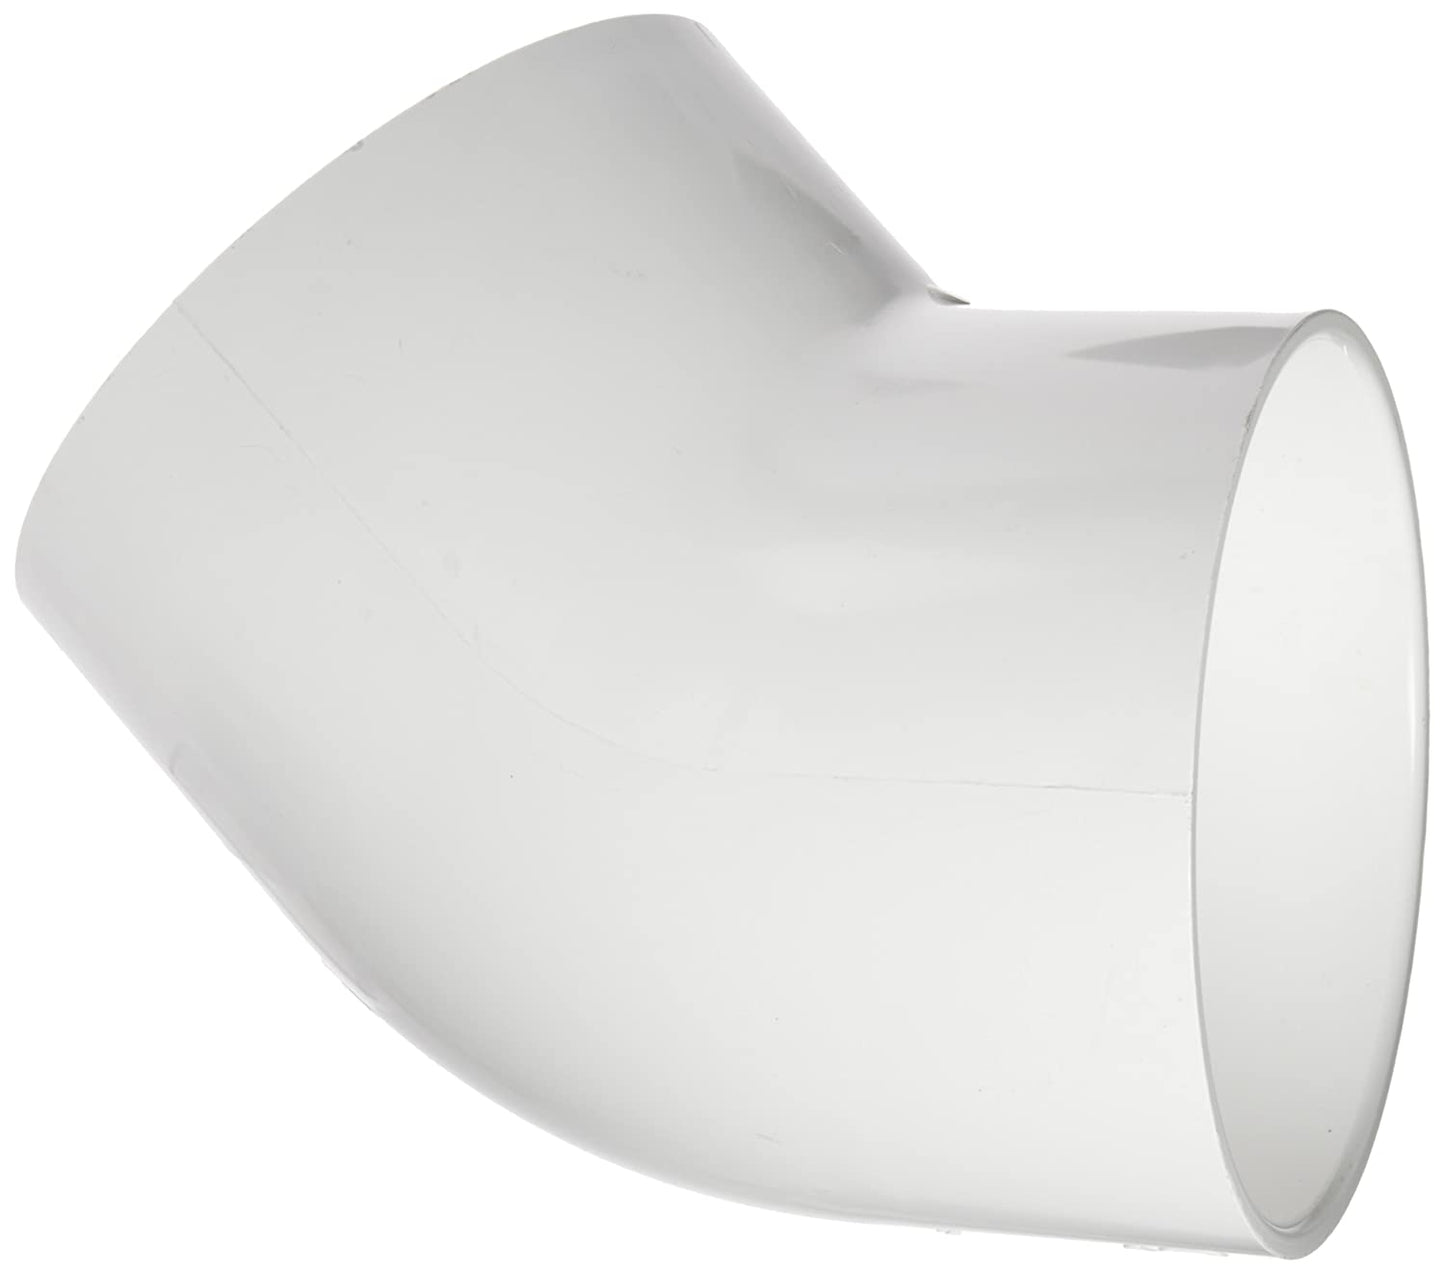 417-010 - 1" PVC Pipe Fitting, 45 Degree Elbow, Schedule 40,  Socket